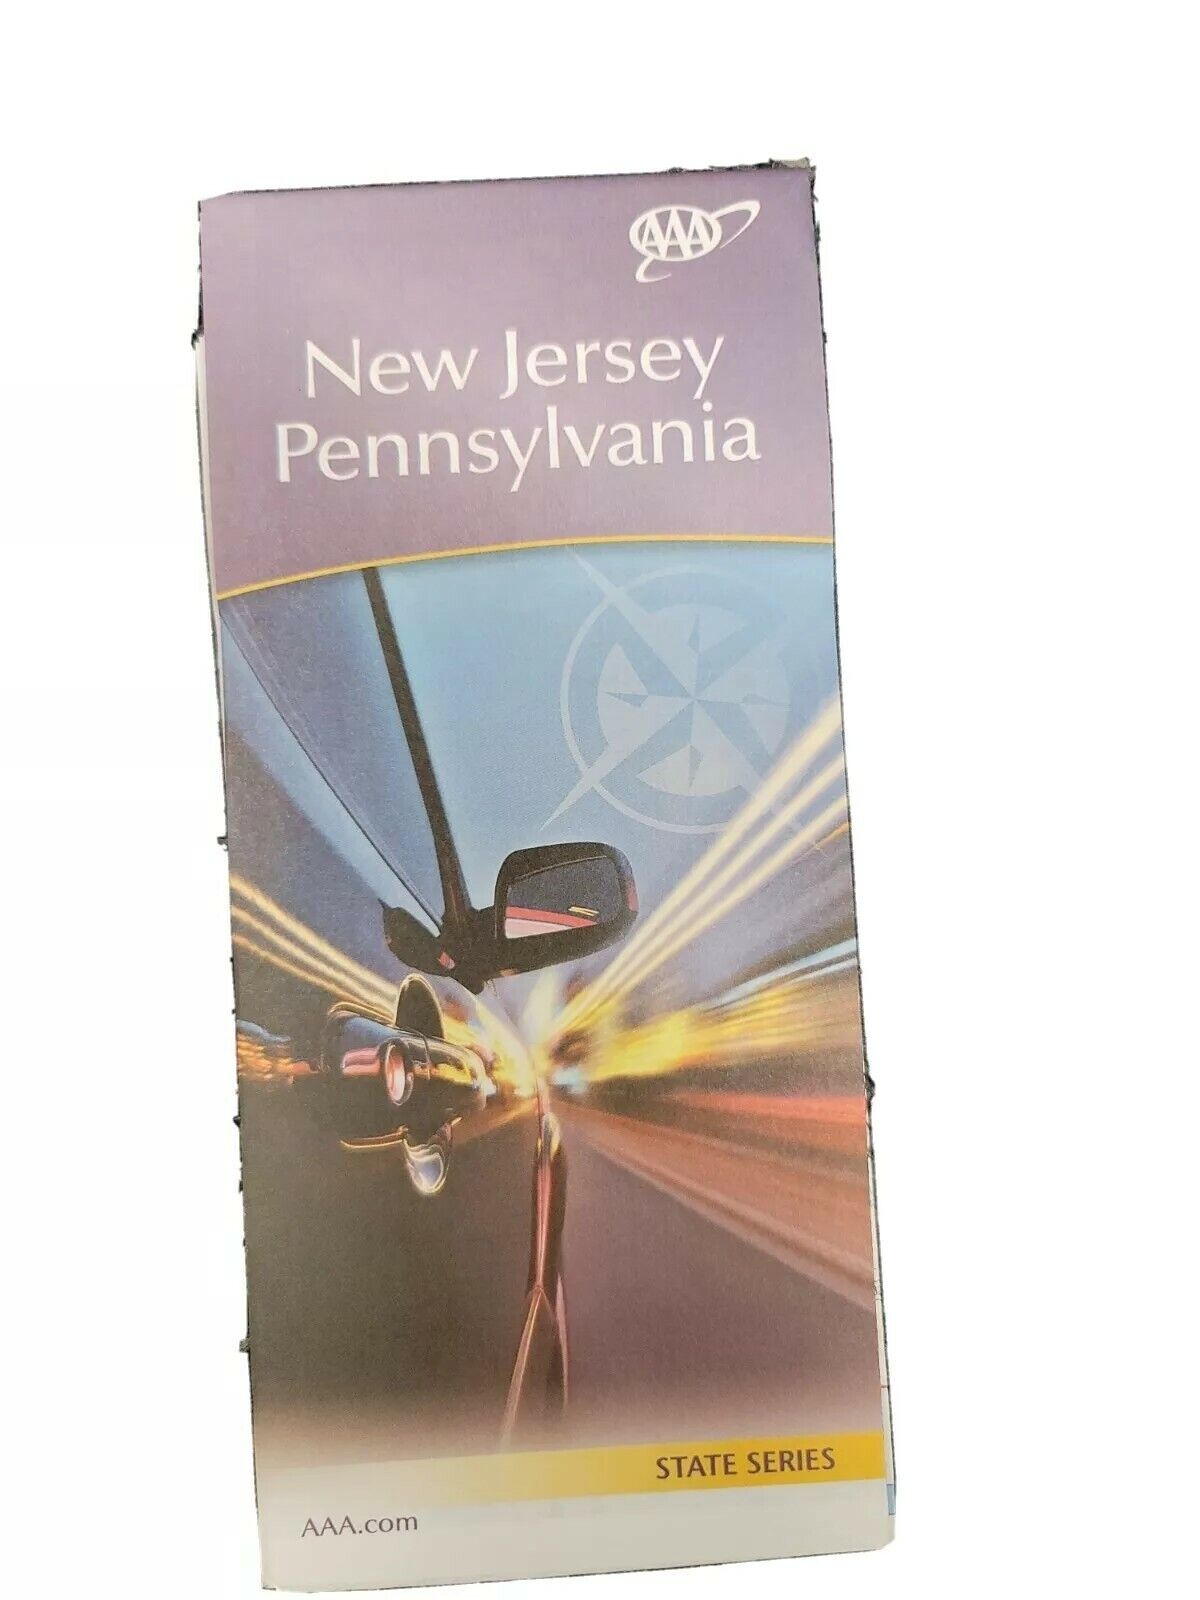 AAA Road Map of Pennsylvania and New Jersey